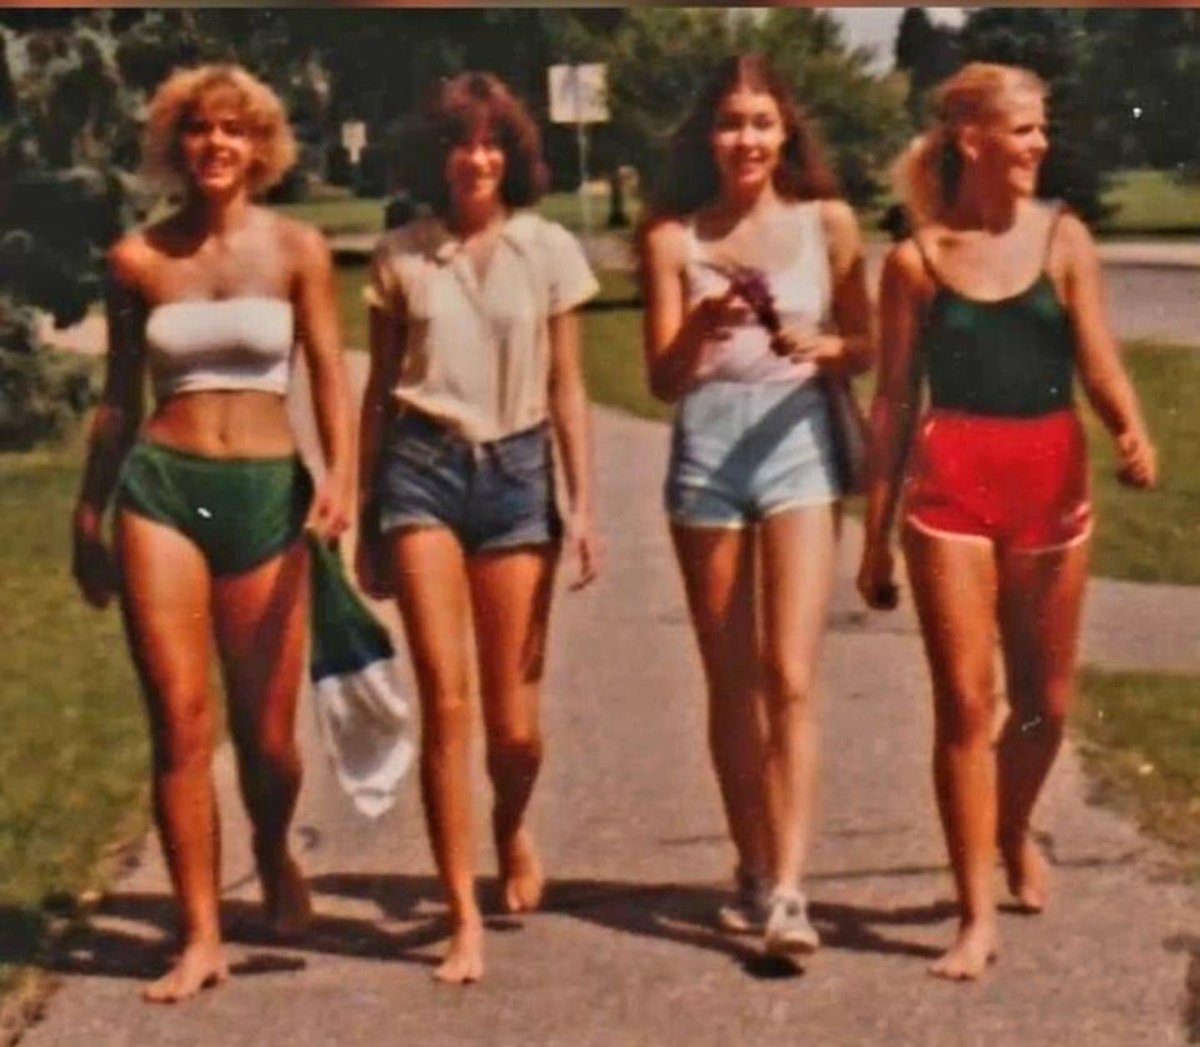 Ahh 60s and 70s. Girls walking barefoot. Loved it. And no none of them got worms!!!